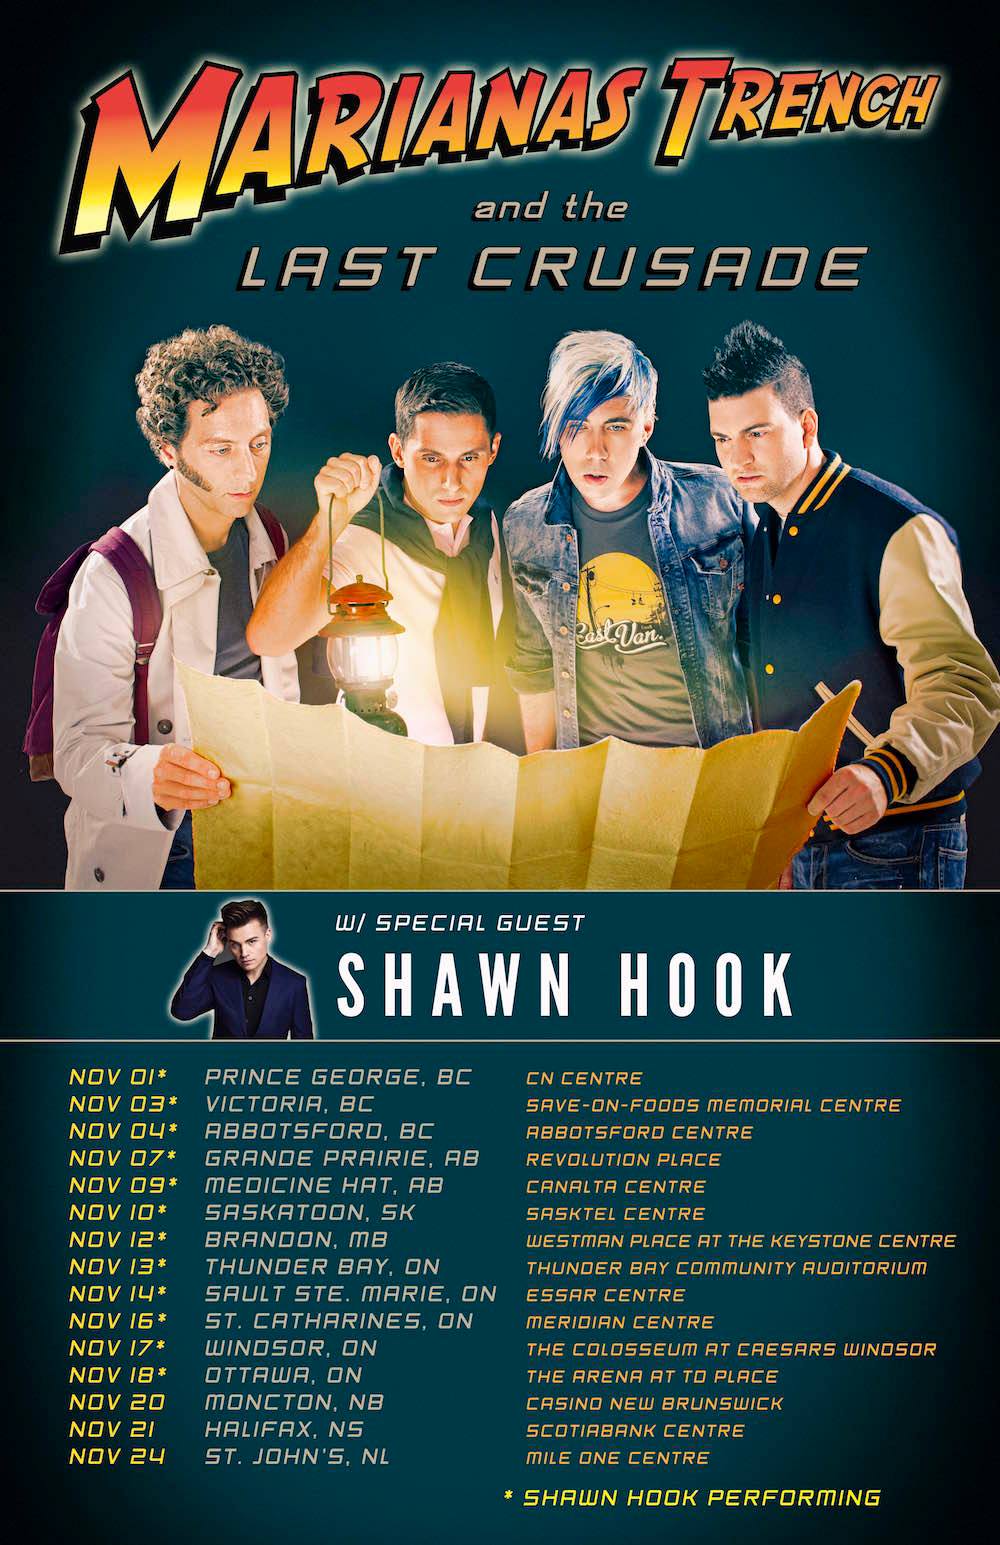 Marianas Trench and the Last Crusade set to invade Canada this fall